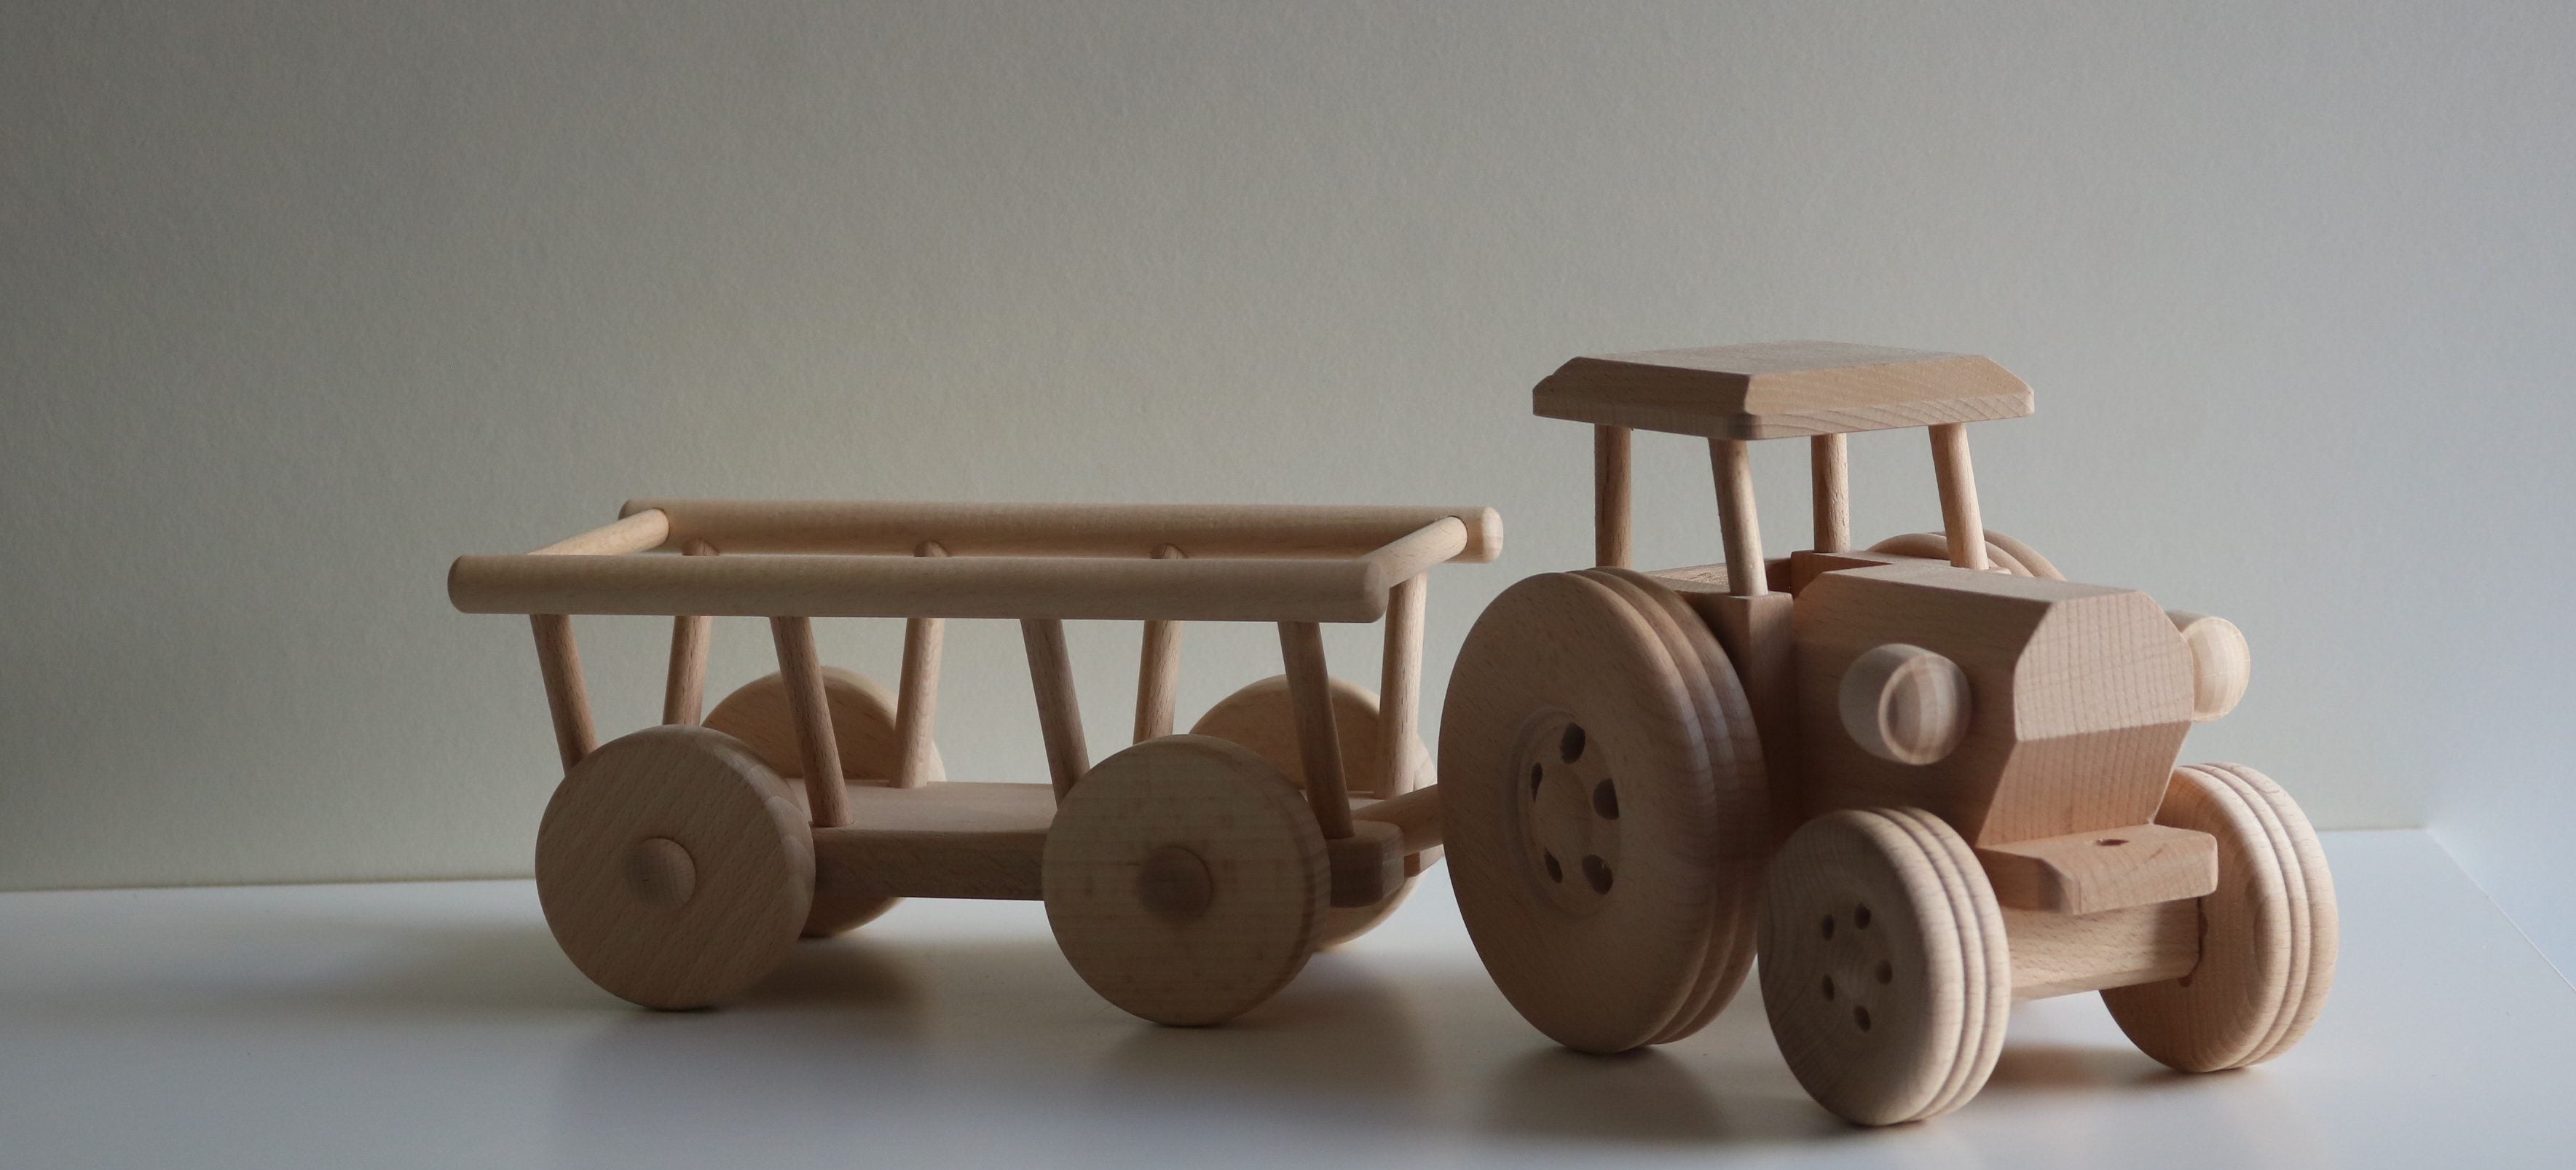 Handmade Wooden Vehicles | Farm Tractor with Hay Trailer - Moo Like a Monkey